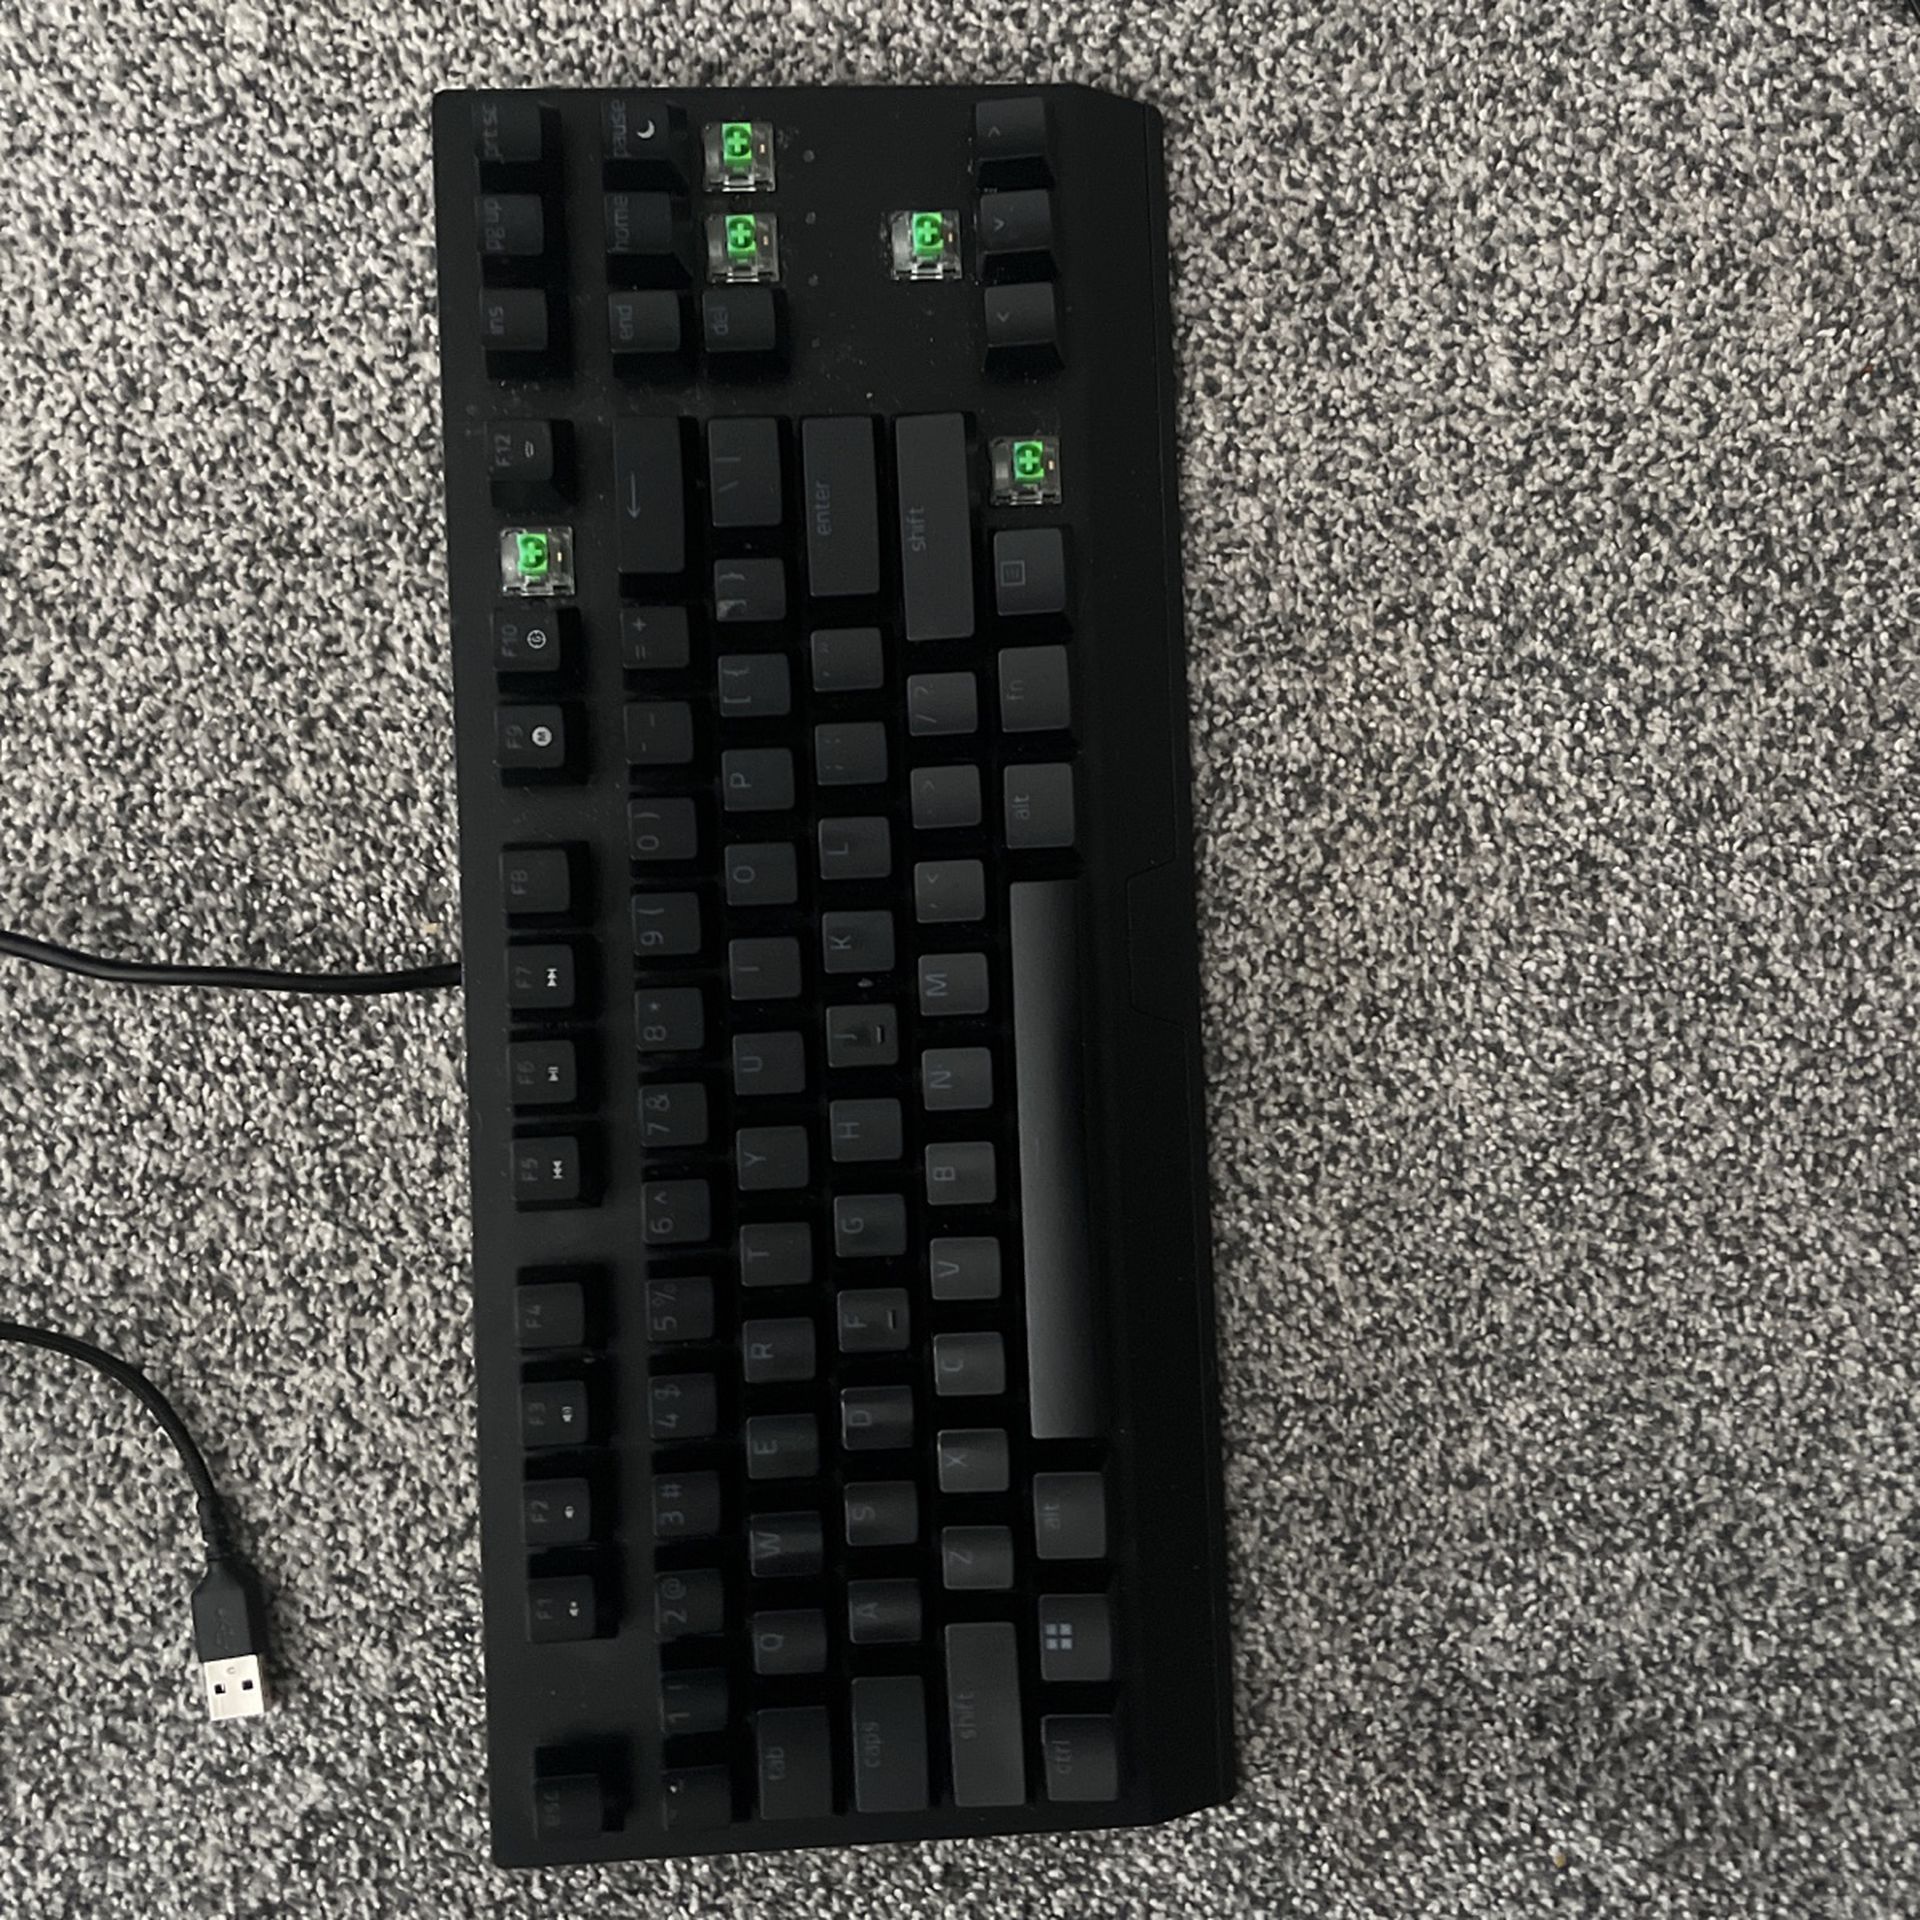 2 Gaming Keyboard And One Mouse